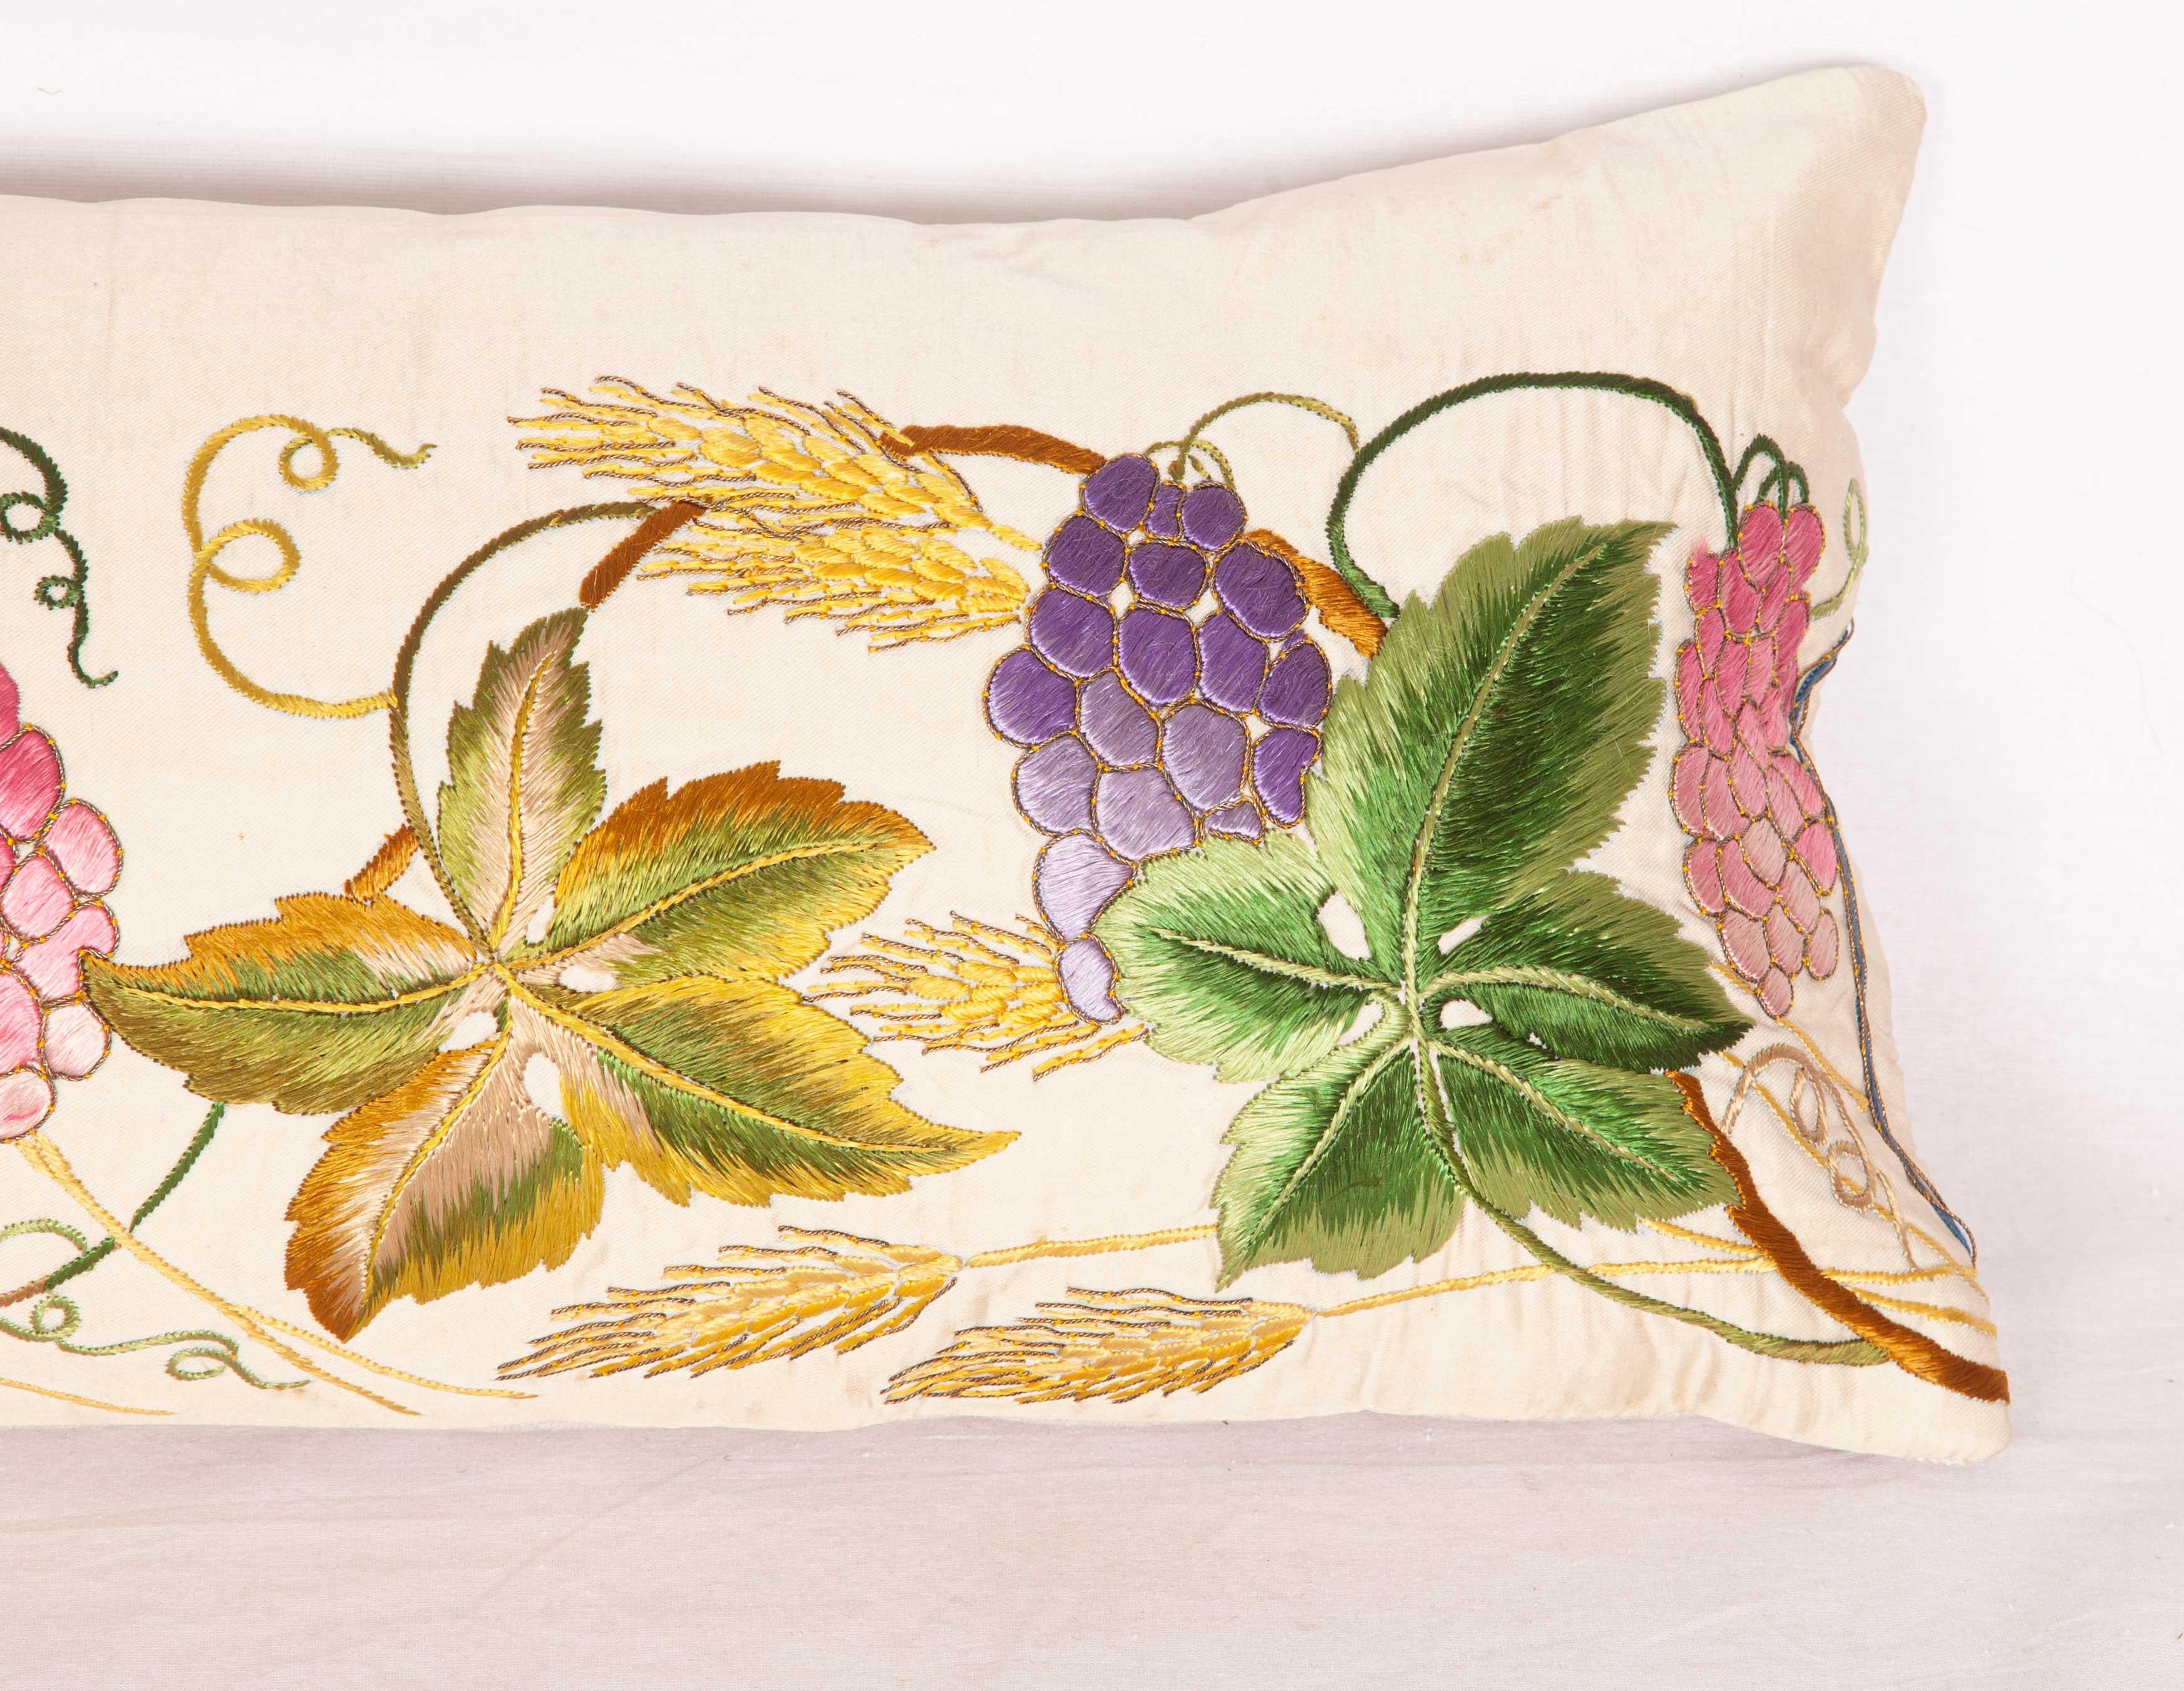 Italian Antique Lumbar Pillow Case Made from an 18th-19th Century European Embroidery For Sale